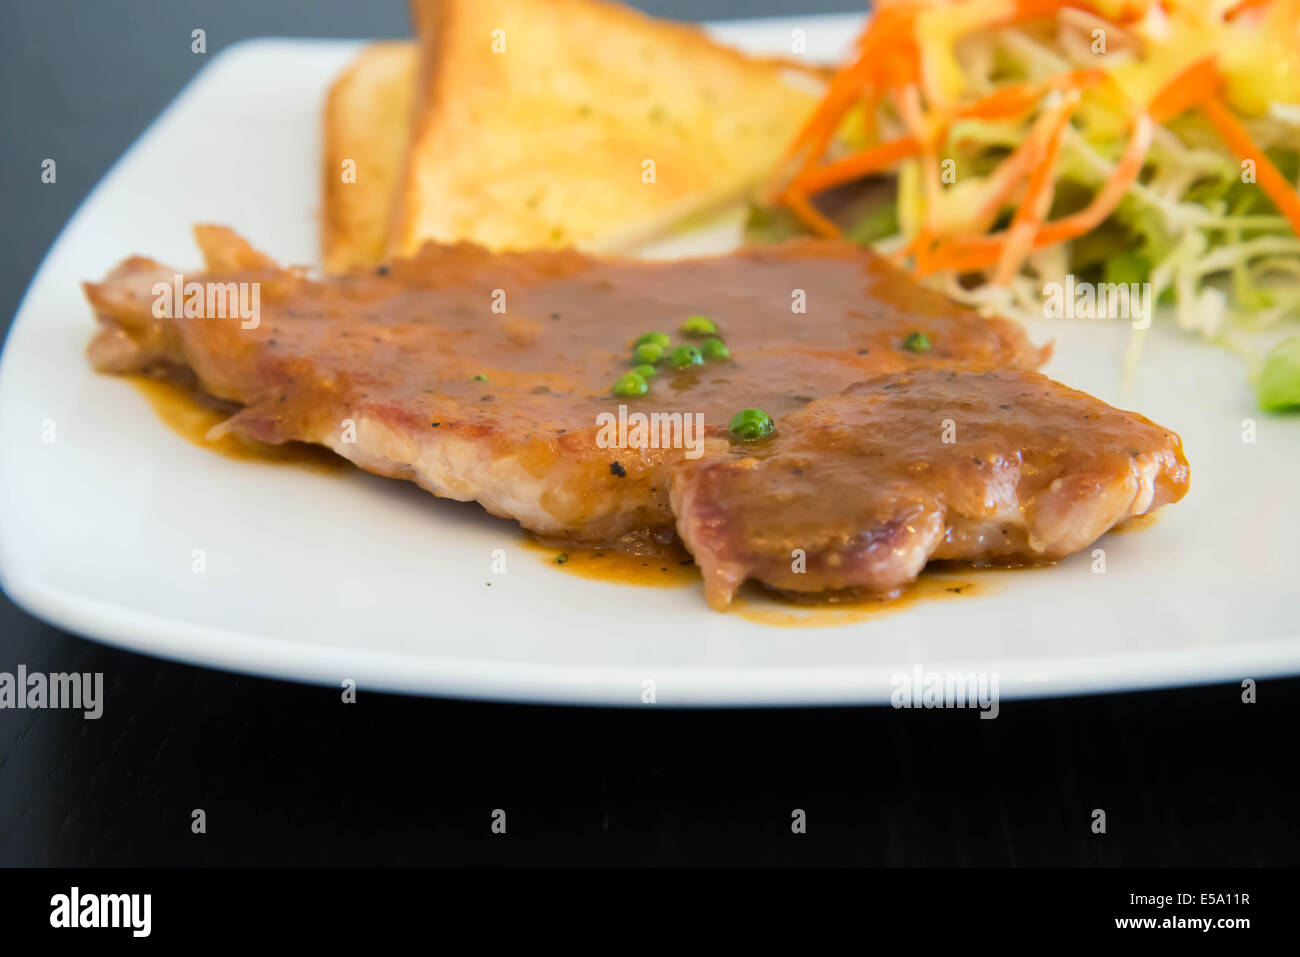 Pork steak with toast on a wooden table. Stock Photo